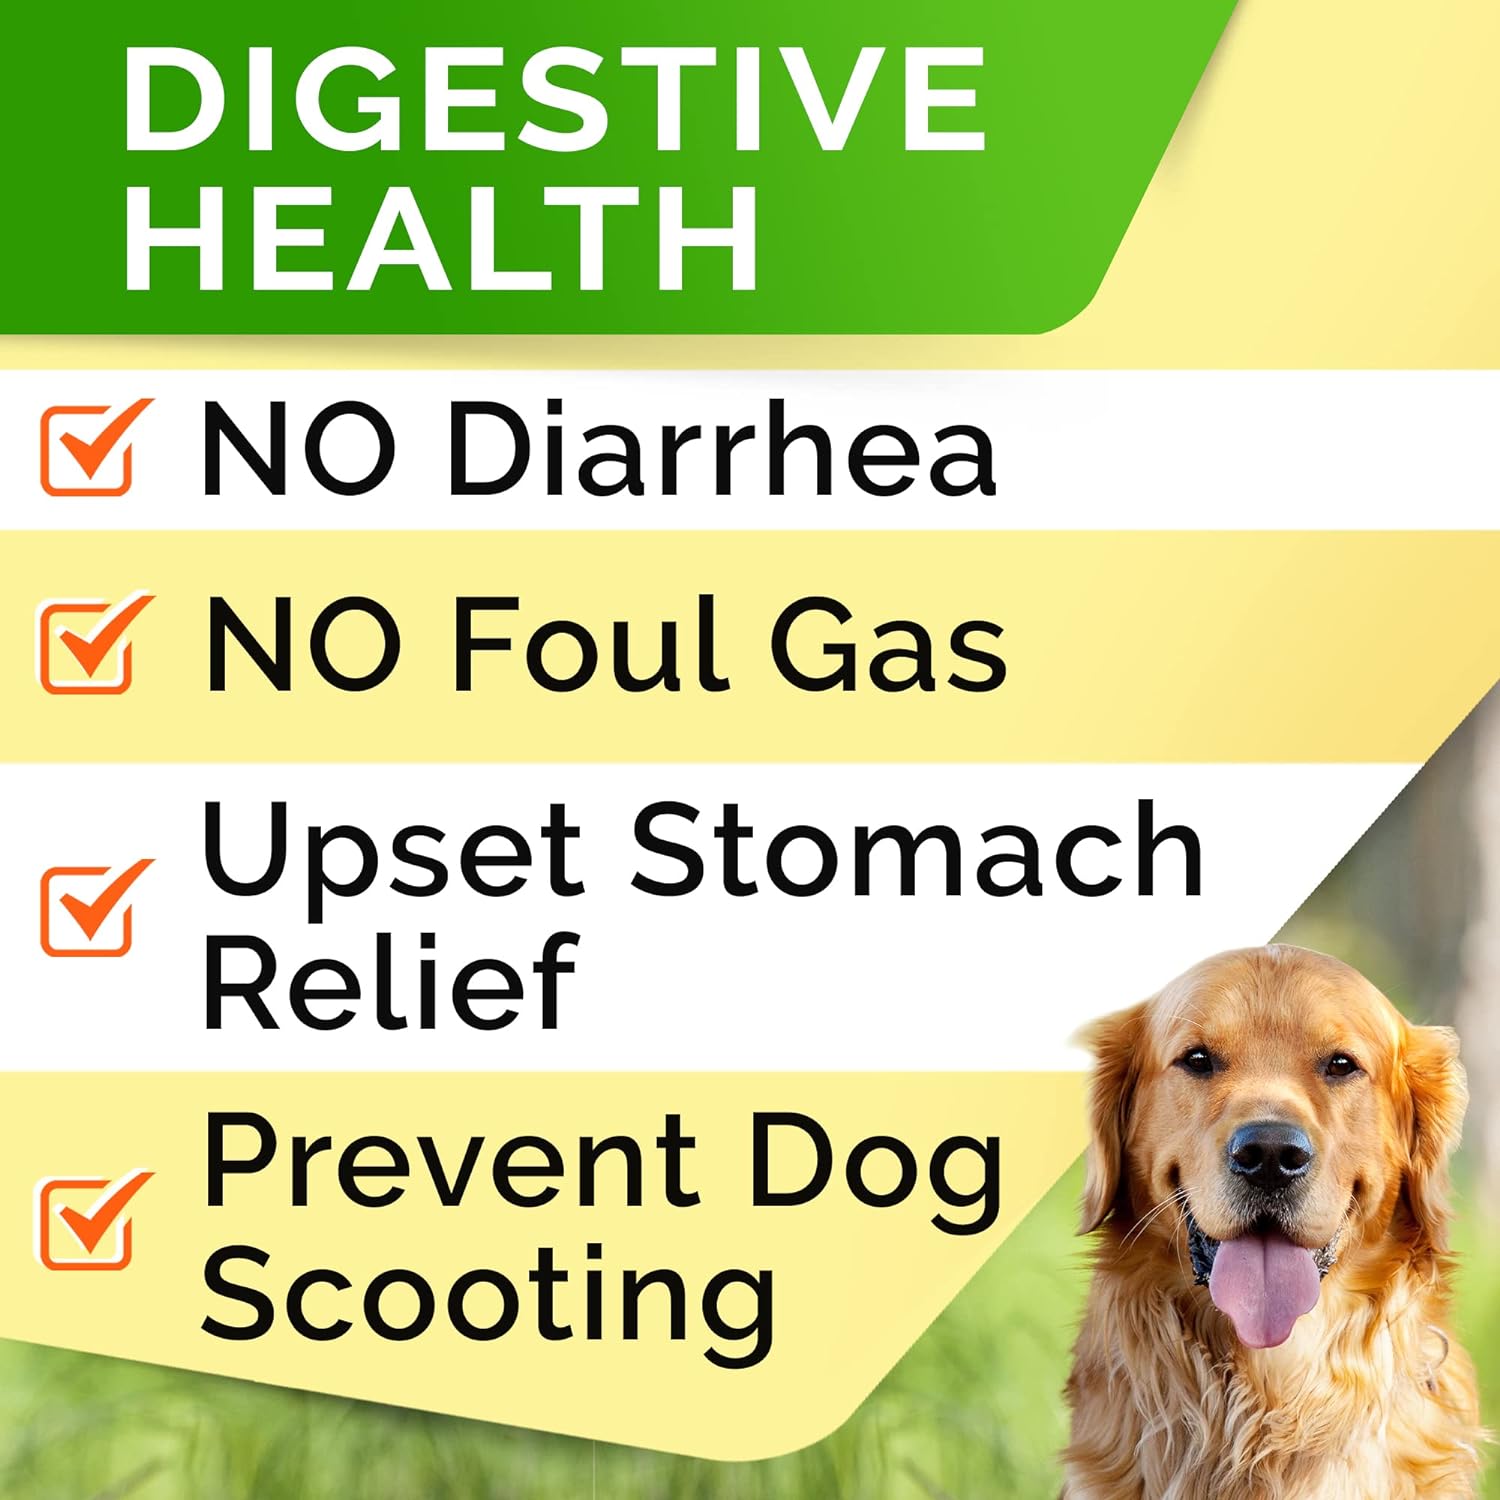 StrellaLab Dog Probiotics Treats for Picky Eaters - Digestive Enzymes + Prebiotics - Chewable Fiber Supplement - Allergy, Diarrhea, Gas, Constipation, Upset Stomach Relief - Improve Digestion&Immunity : Pet Supplies